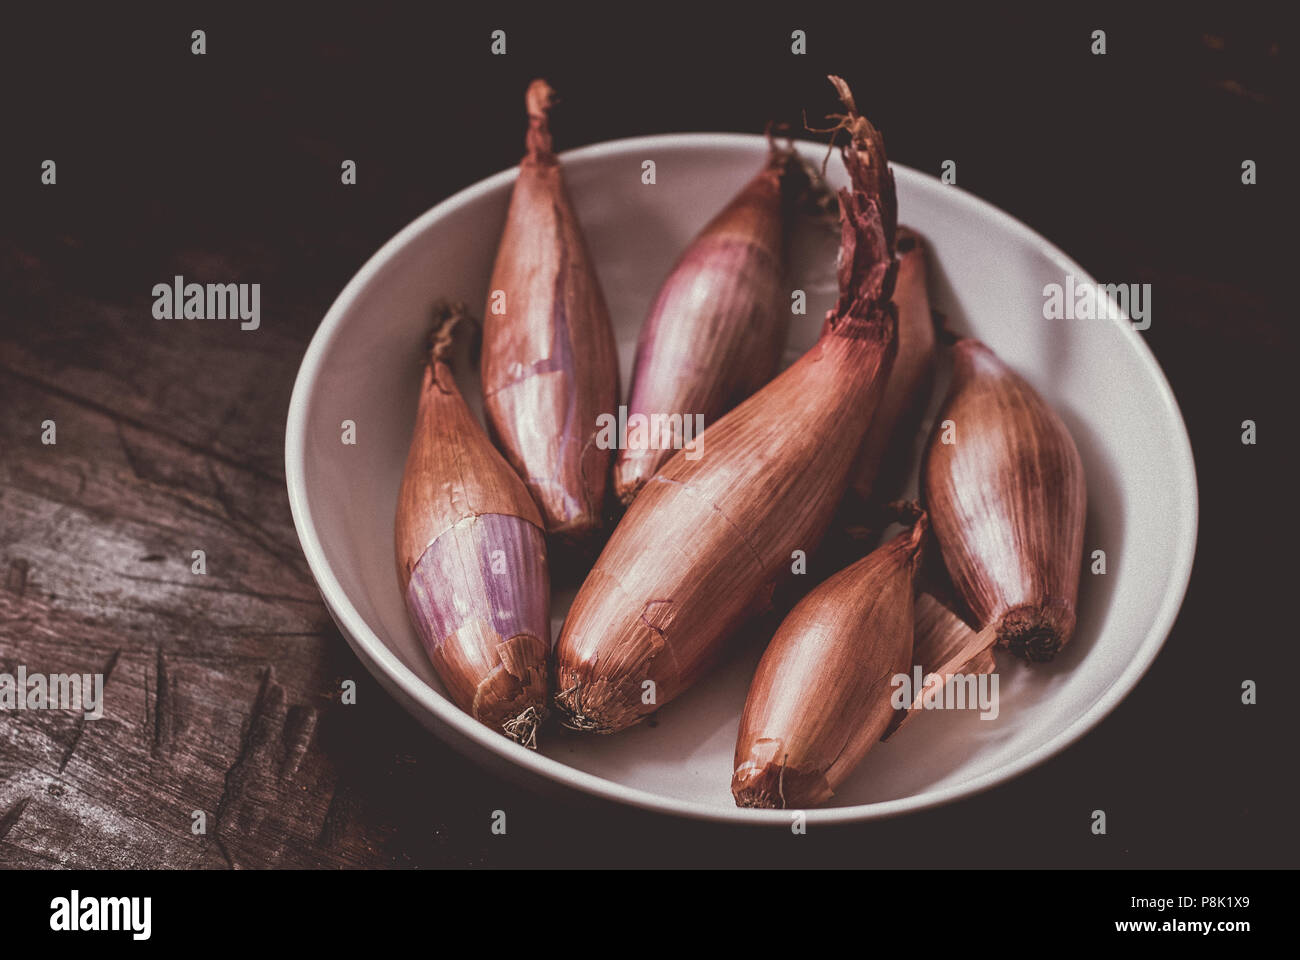 A moody Still life food image of Organic Shallots in a white bowl against a dark wooden background in  an Instagram style. Stock Photo